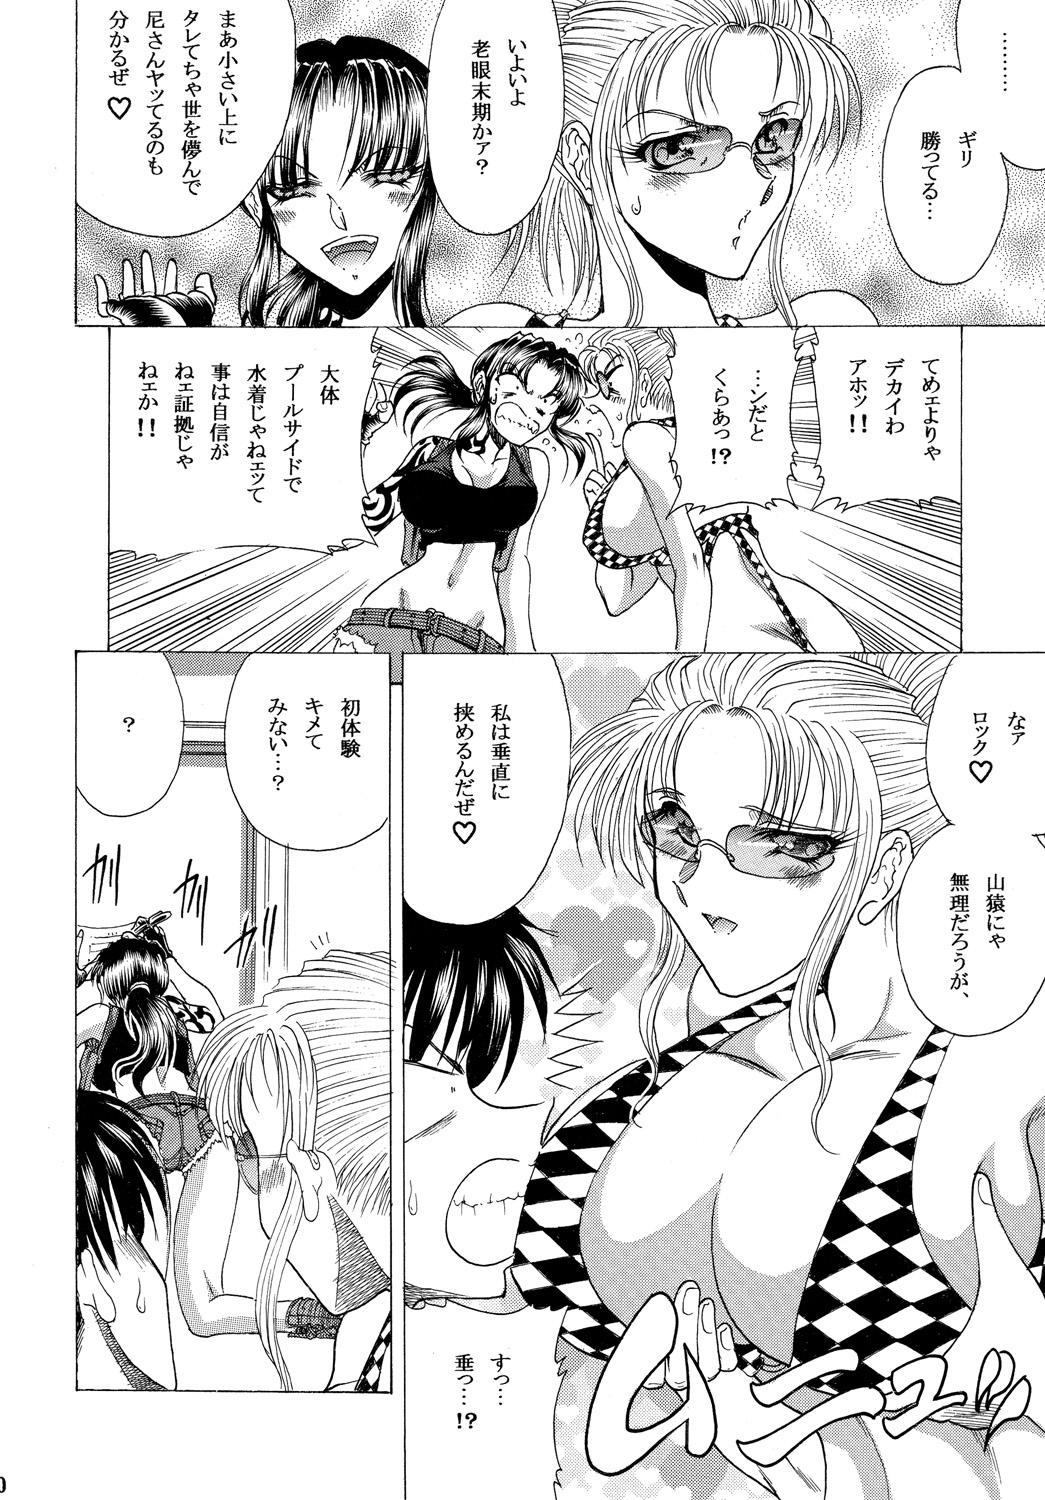 Transsexual ZONE 48 - Black lagoon Huge - Page 9